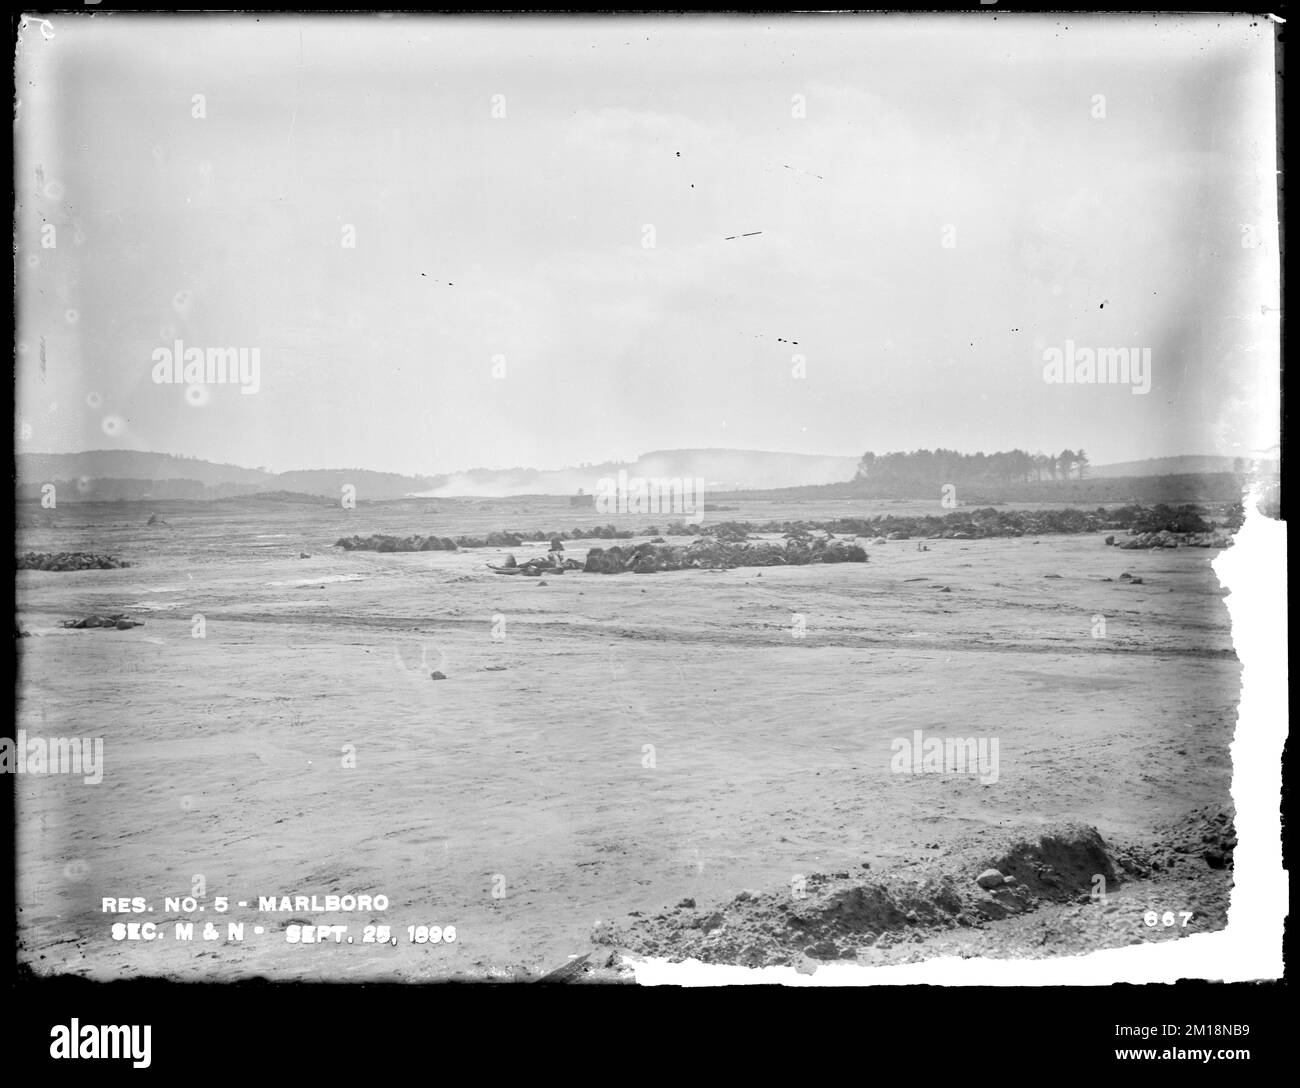 Sudbury Reservoir, Sections M and N, from the north, Marlborough, Mass., Sep. 25, 1896 , waterworks, reservoirs water distribution structures, construction sites Stock Photo